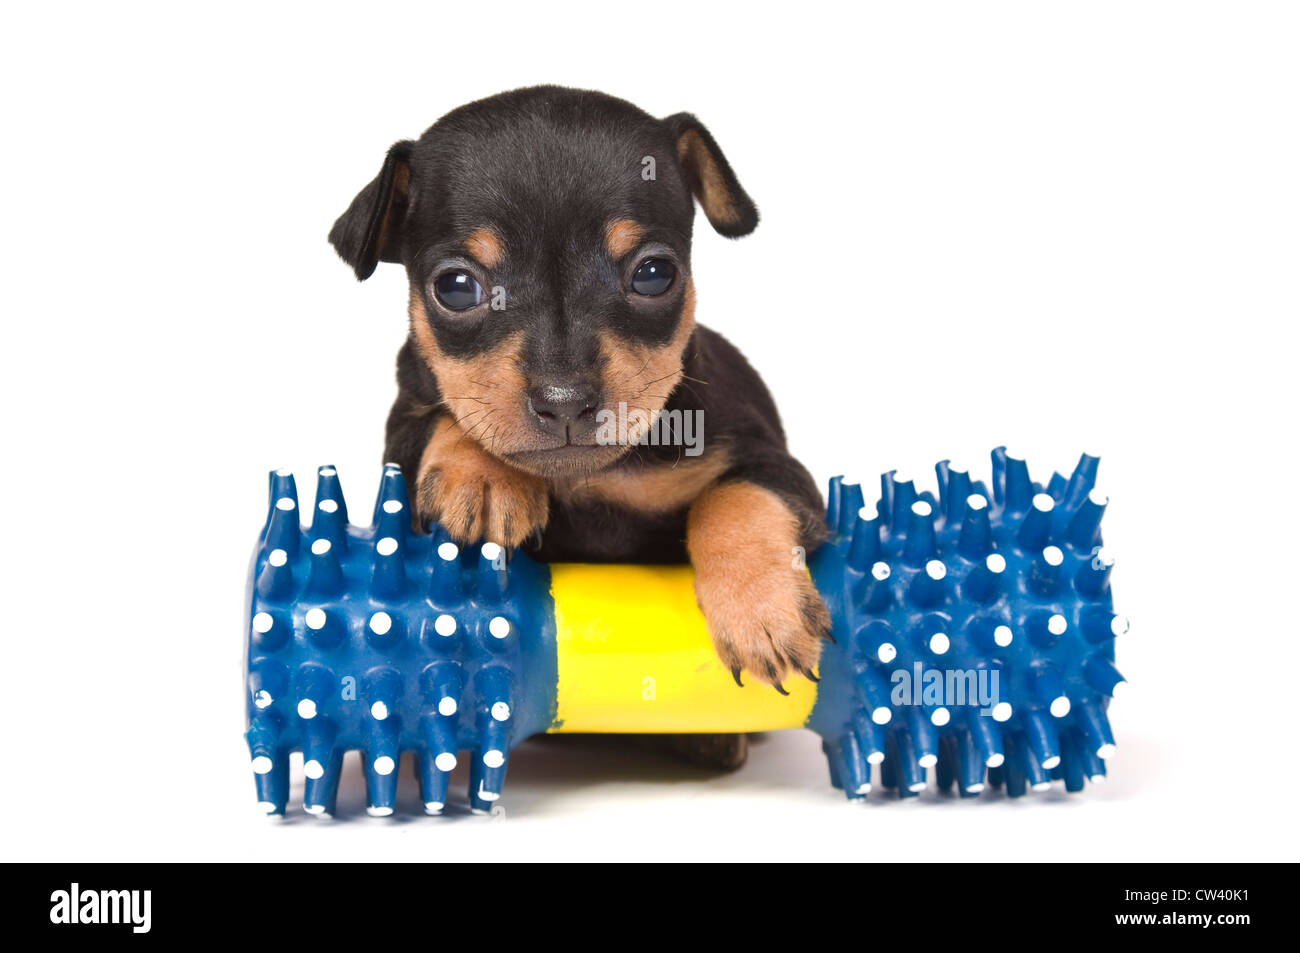 Prague Rattler. Puppy with a plastic toy dumbdell. Studio picture against a white background Stock Photo